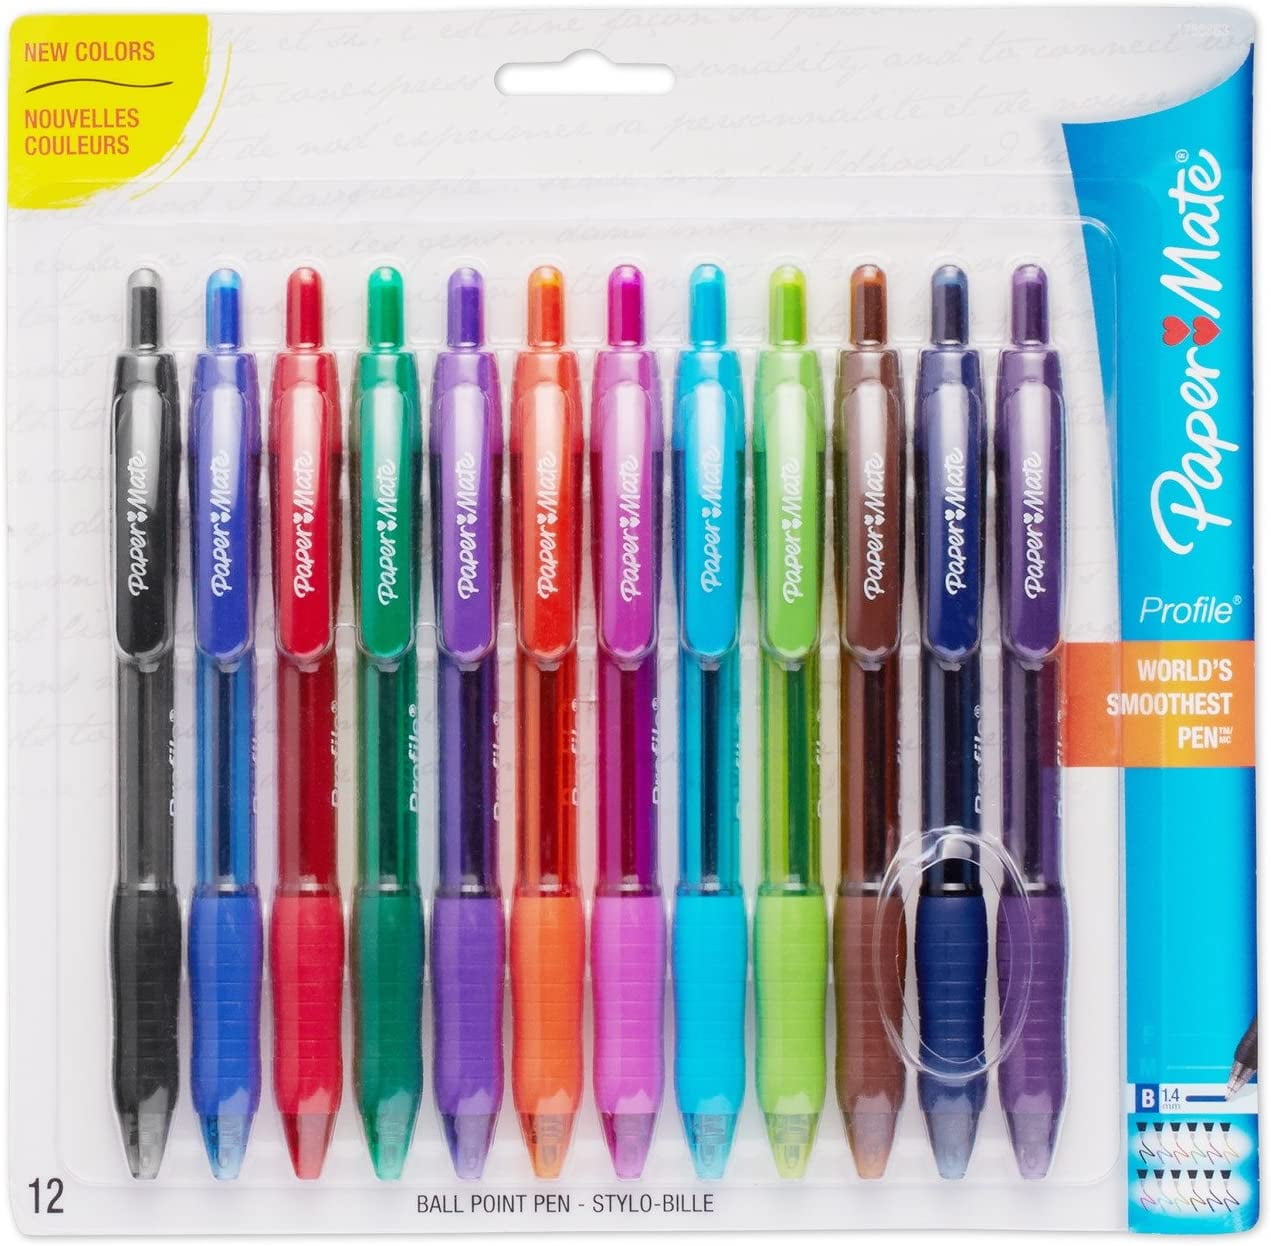 New Bold 1.4mm , Profile Retractable Ballpoint Pens 12 Count Assorted Colors